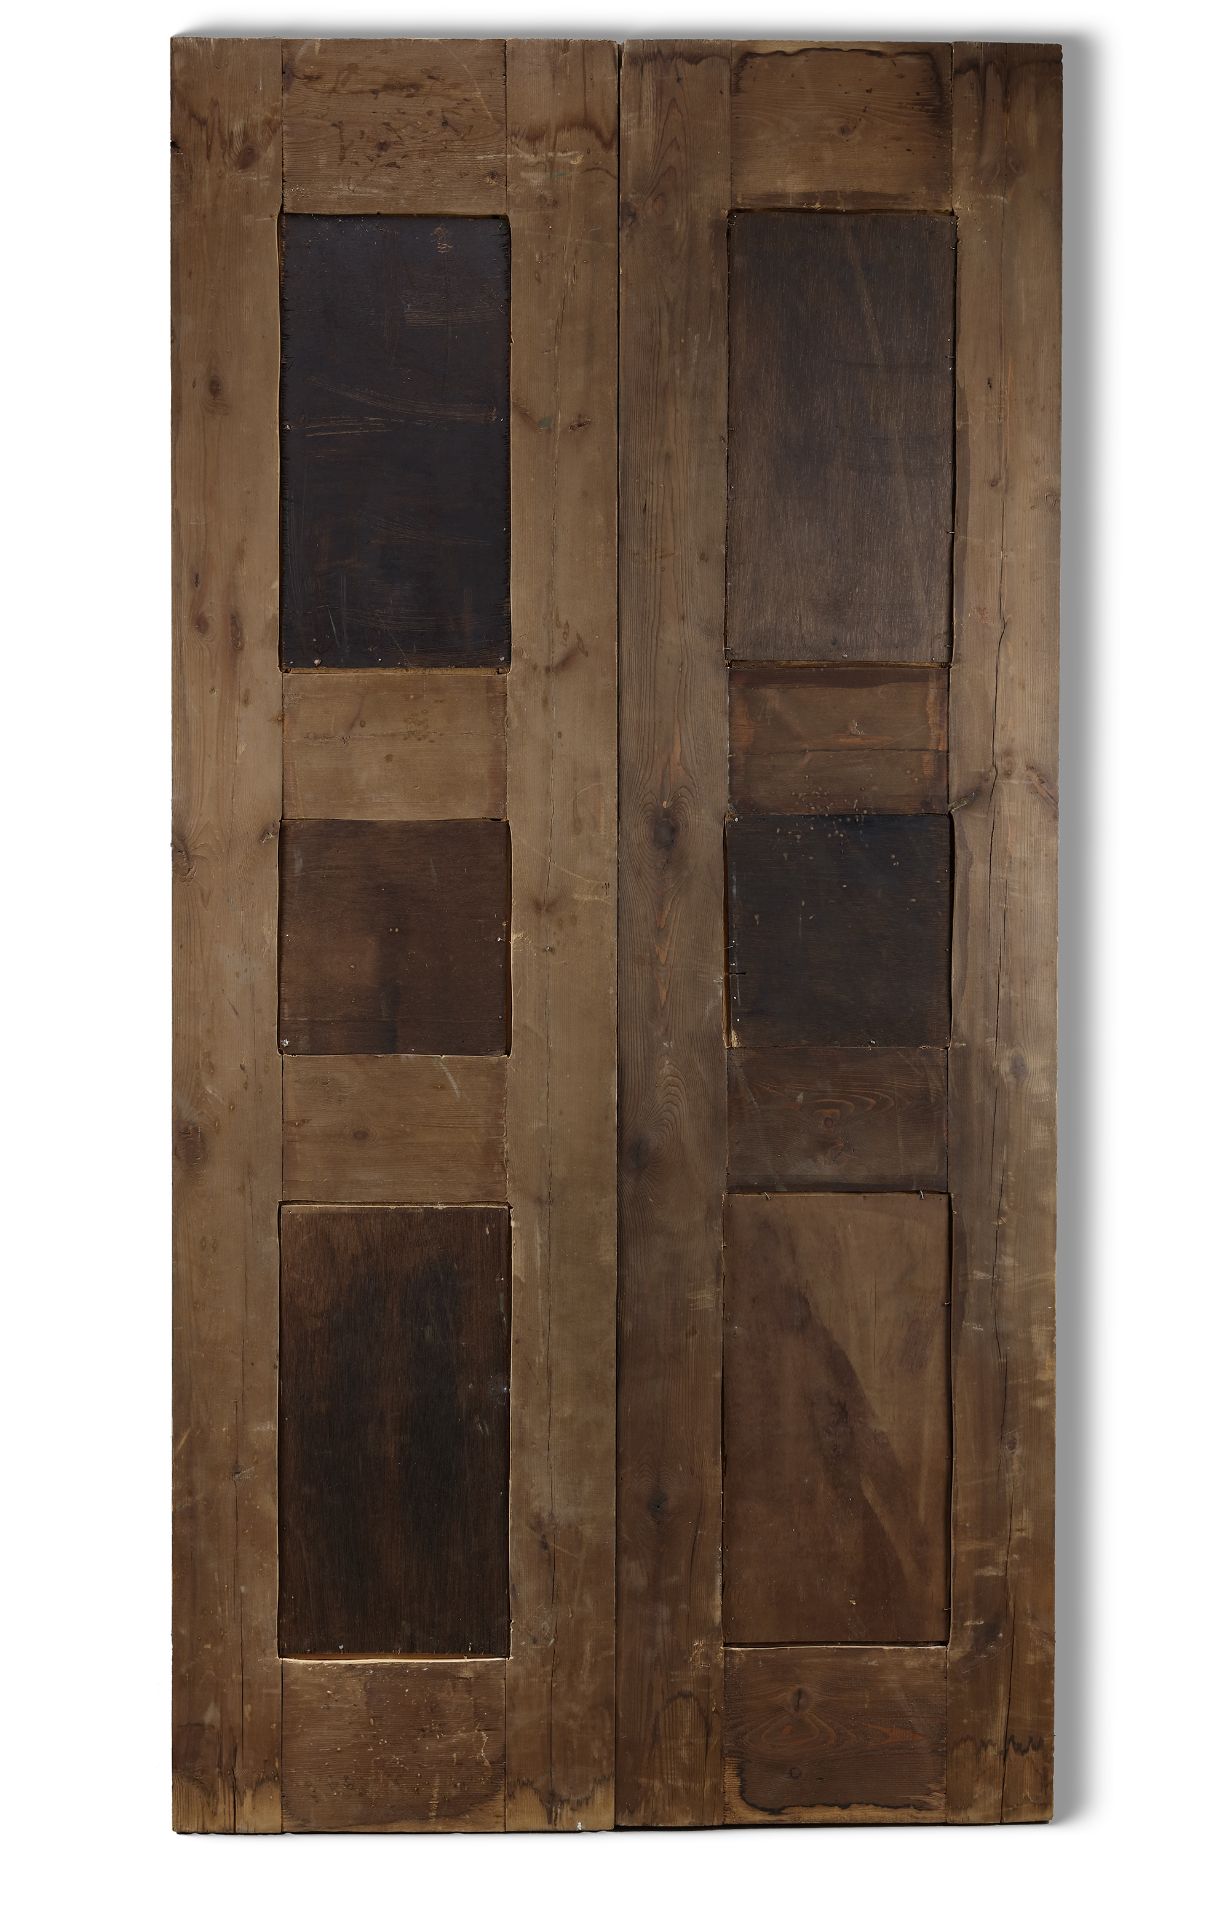 A WOODEN DOOR SET WITH 10 DAMASCUS STYLE POTTERY TILES, 20TH CENTURY - Image 2 of 2